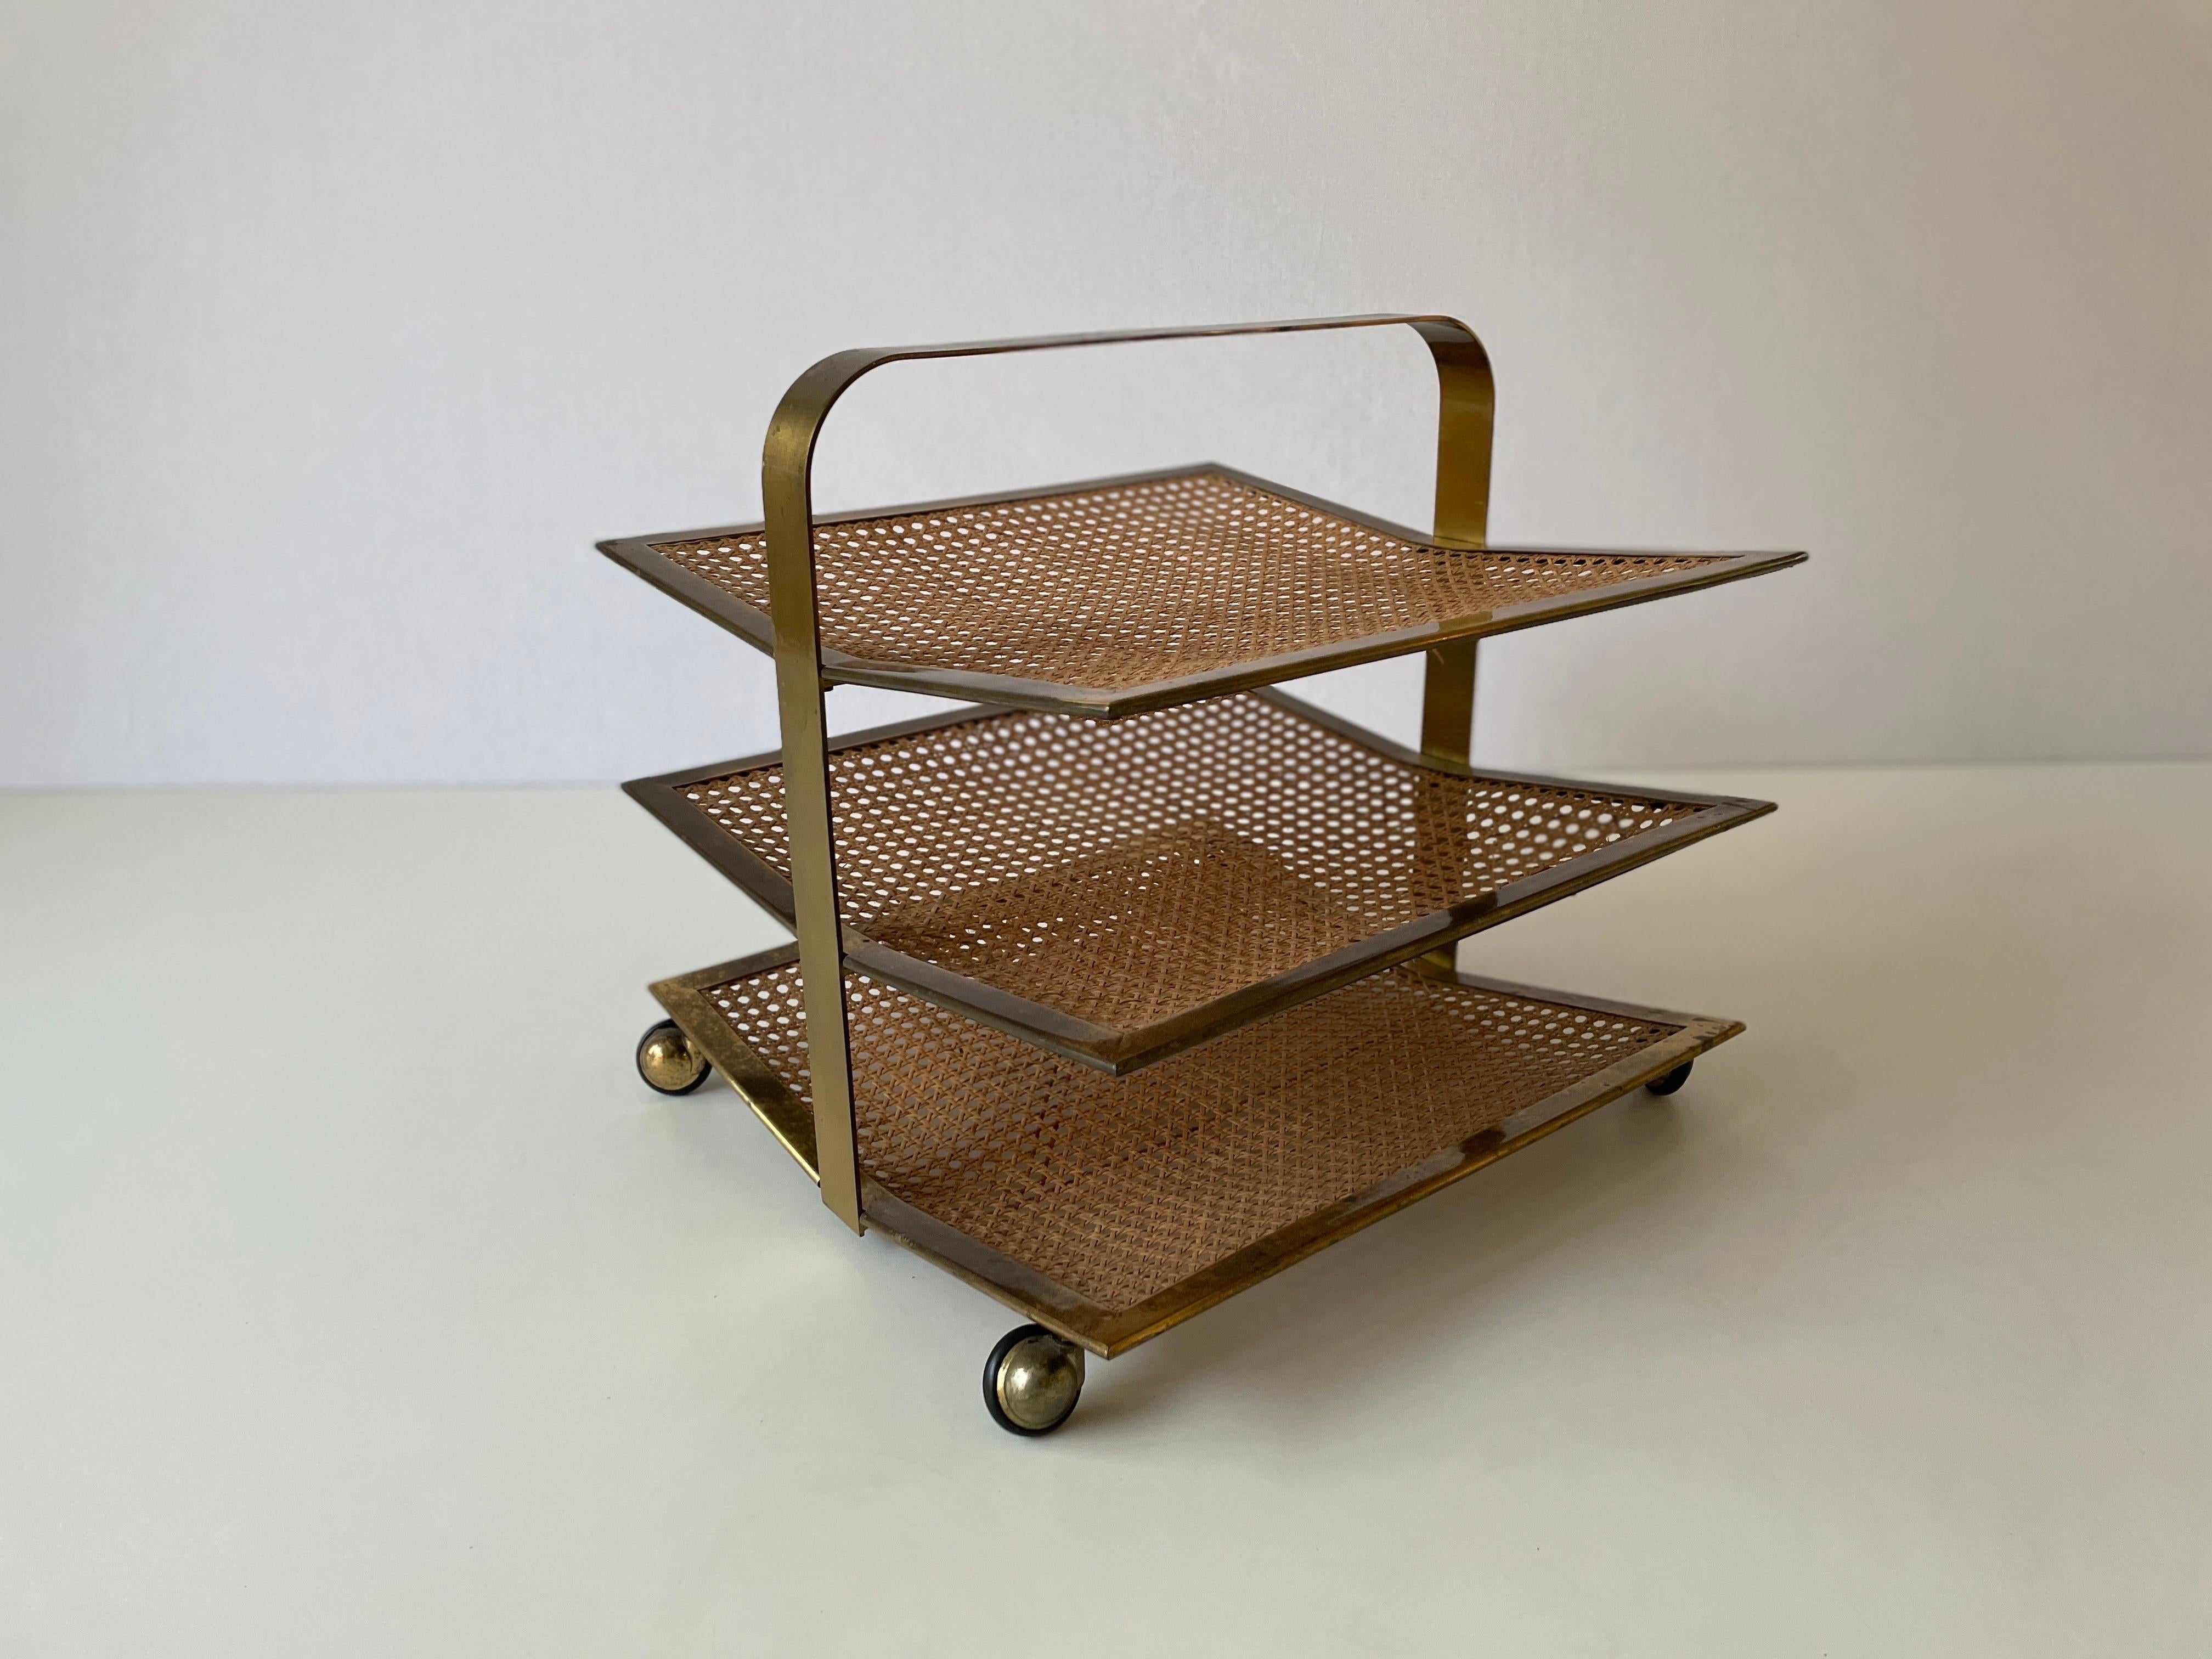 Wicker - Brass Wonderful Luxury Magazine Rack with 3 Shelf, 1960s, Italy In Excellent Condition For Sale In Hagenbach, DE